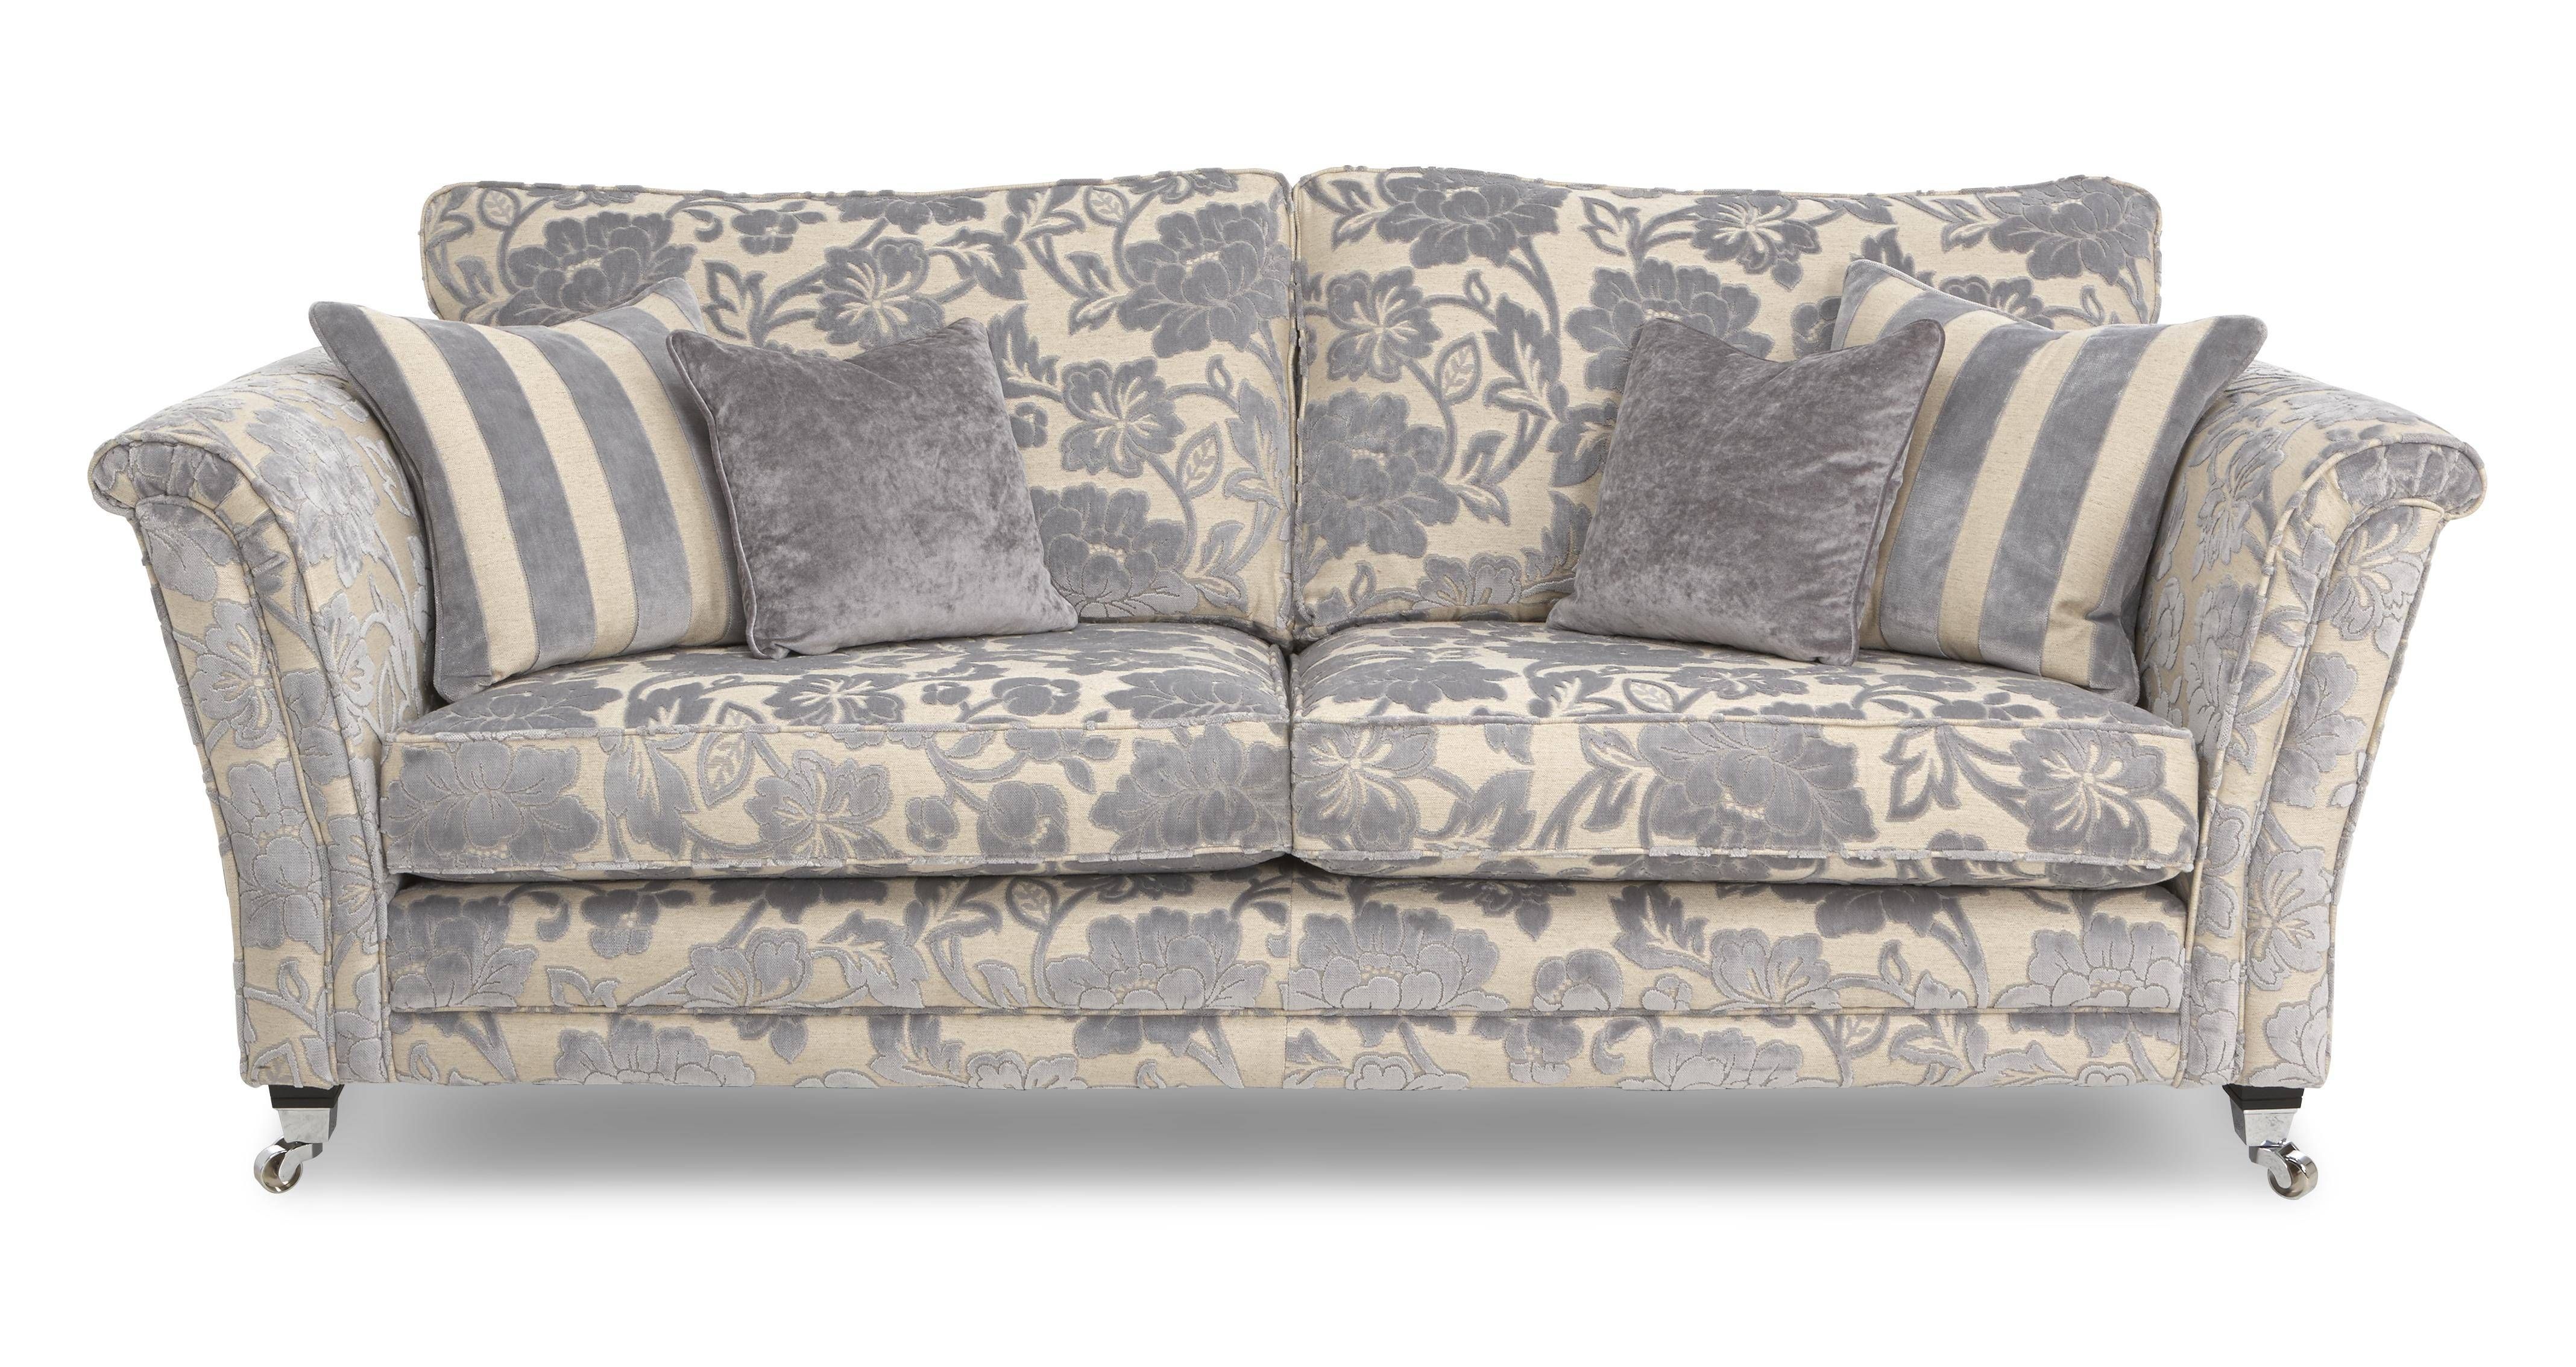 Best Floral Sofas With Hogarth Floral Seater Sofa Hogarth Floral Dfs With Floral Sofas (View 6 of 15)